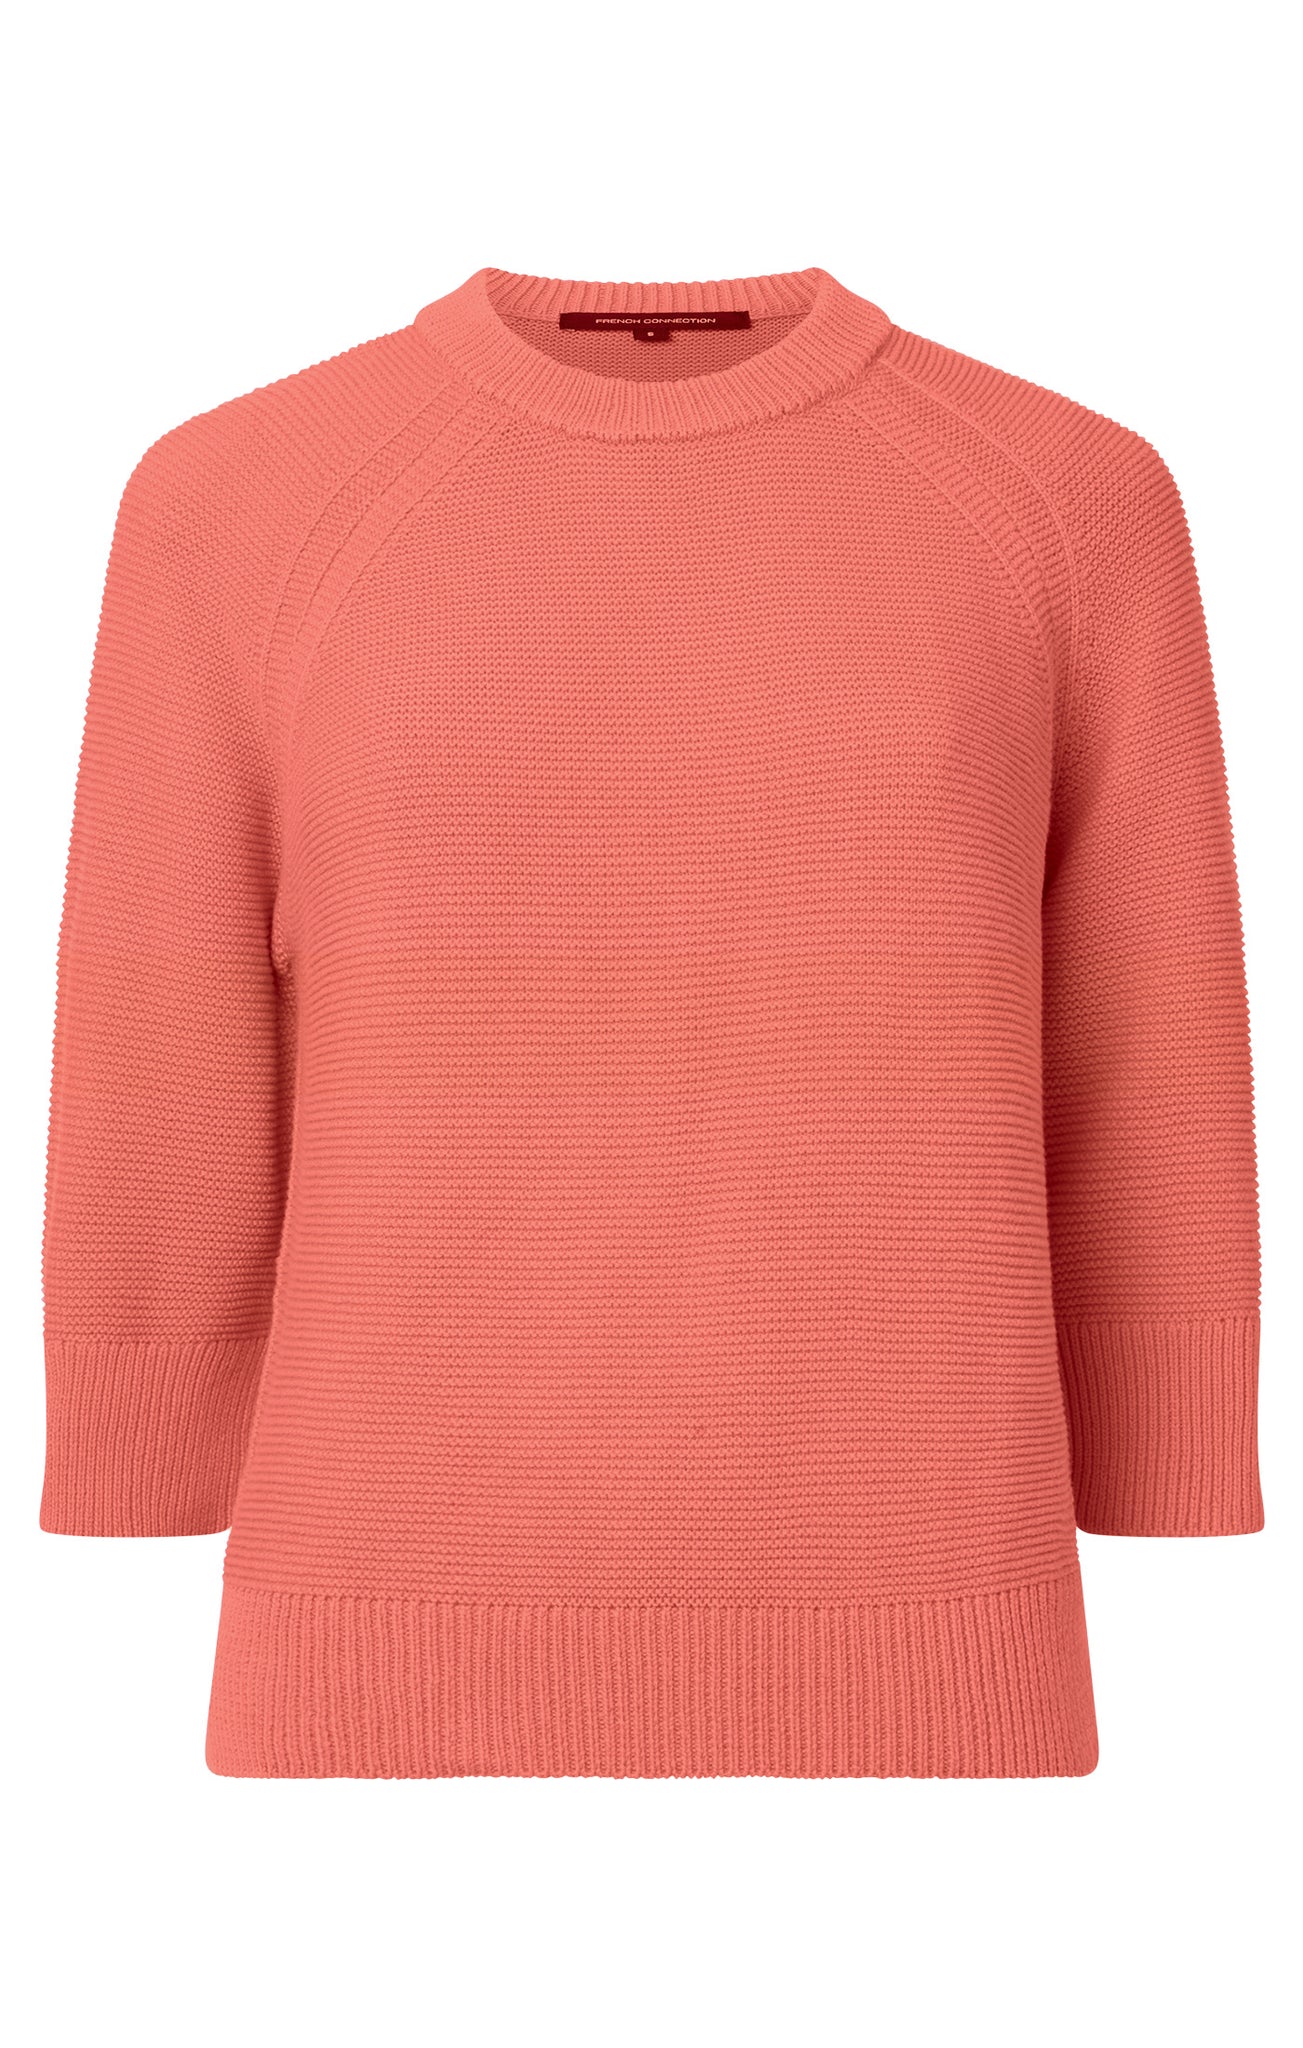 French Connection Lily Mozart Short Sleeve Jumper in Coral